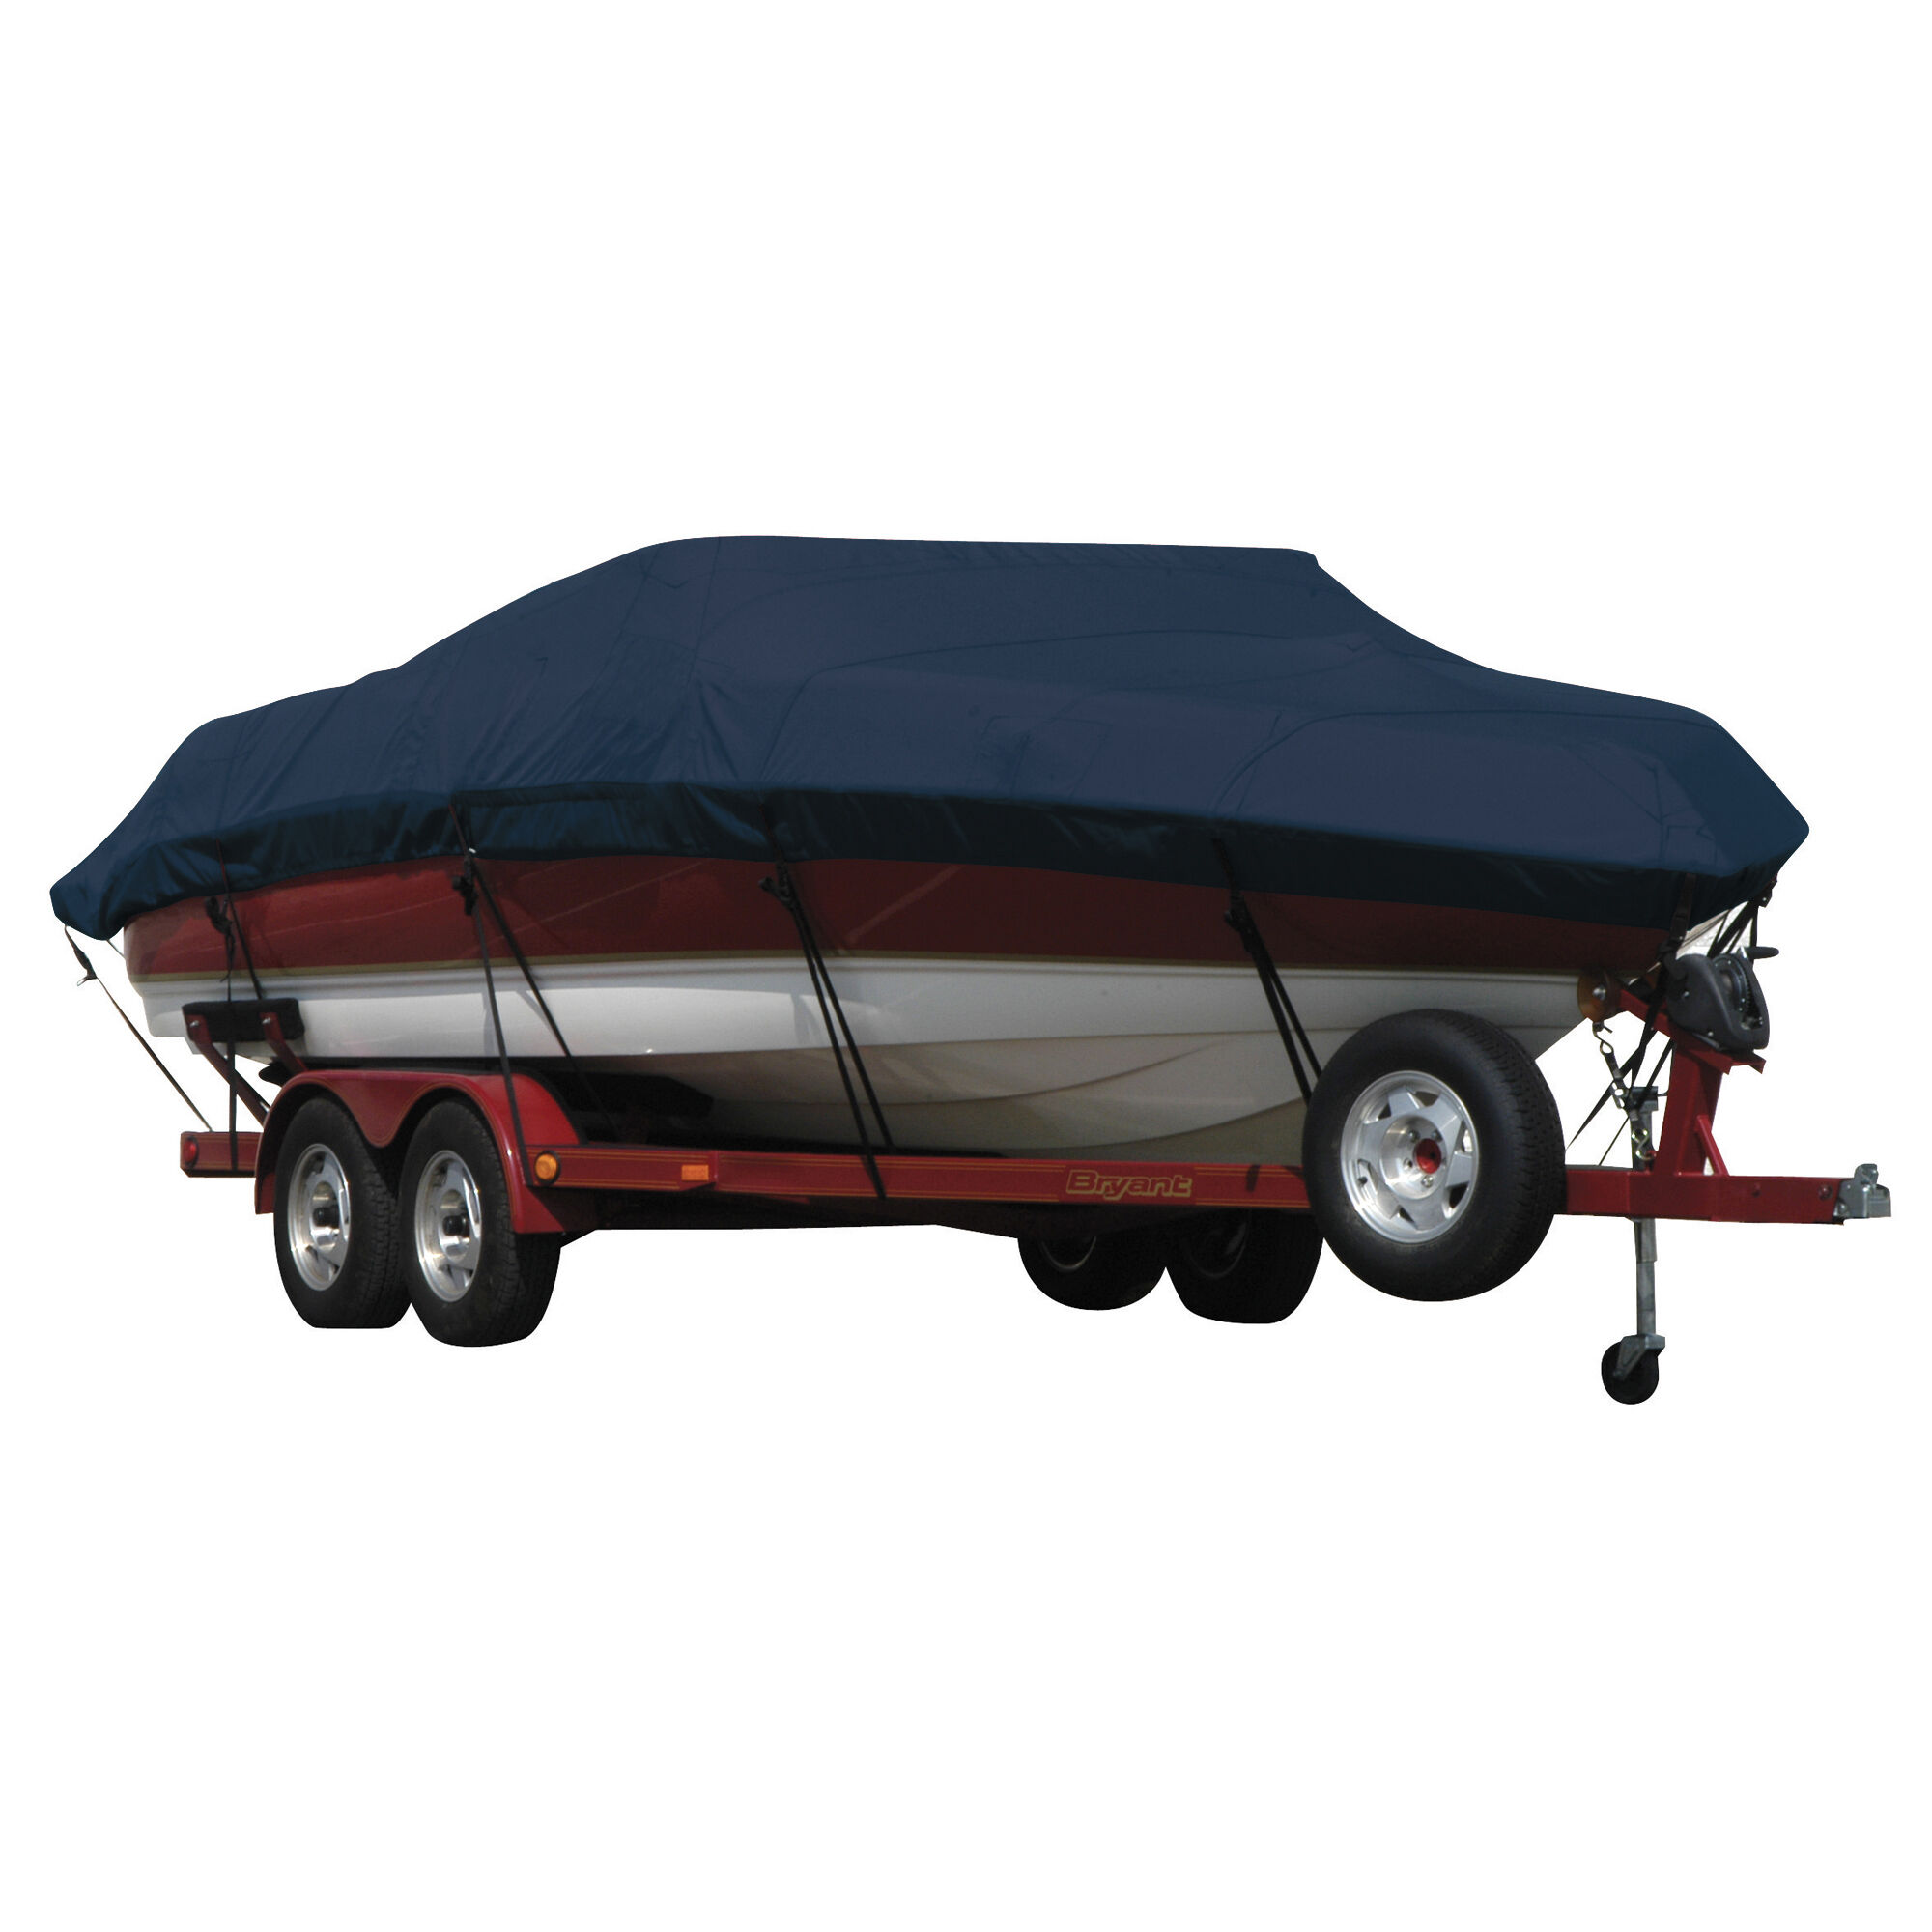 Covermate Exact Fit Sunbrella Boat Cover for Campion Chase 580 Zri/Zricd Chase 580 Zri/Zricd I/O. Navy in Navy Blue Acrylic